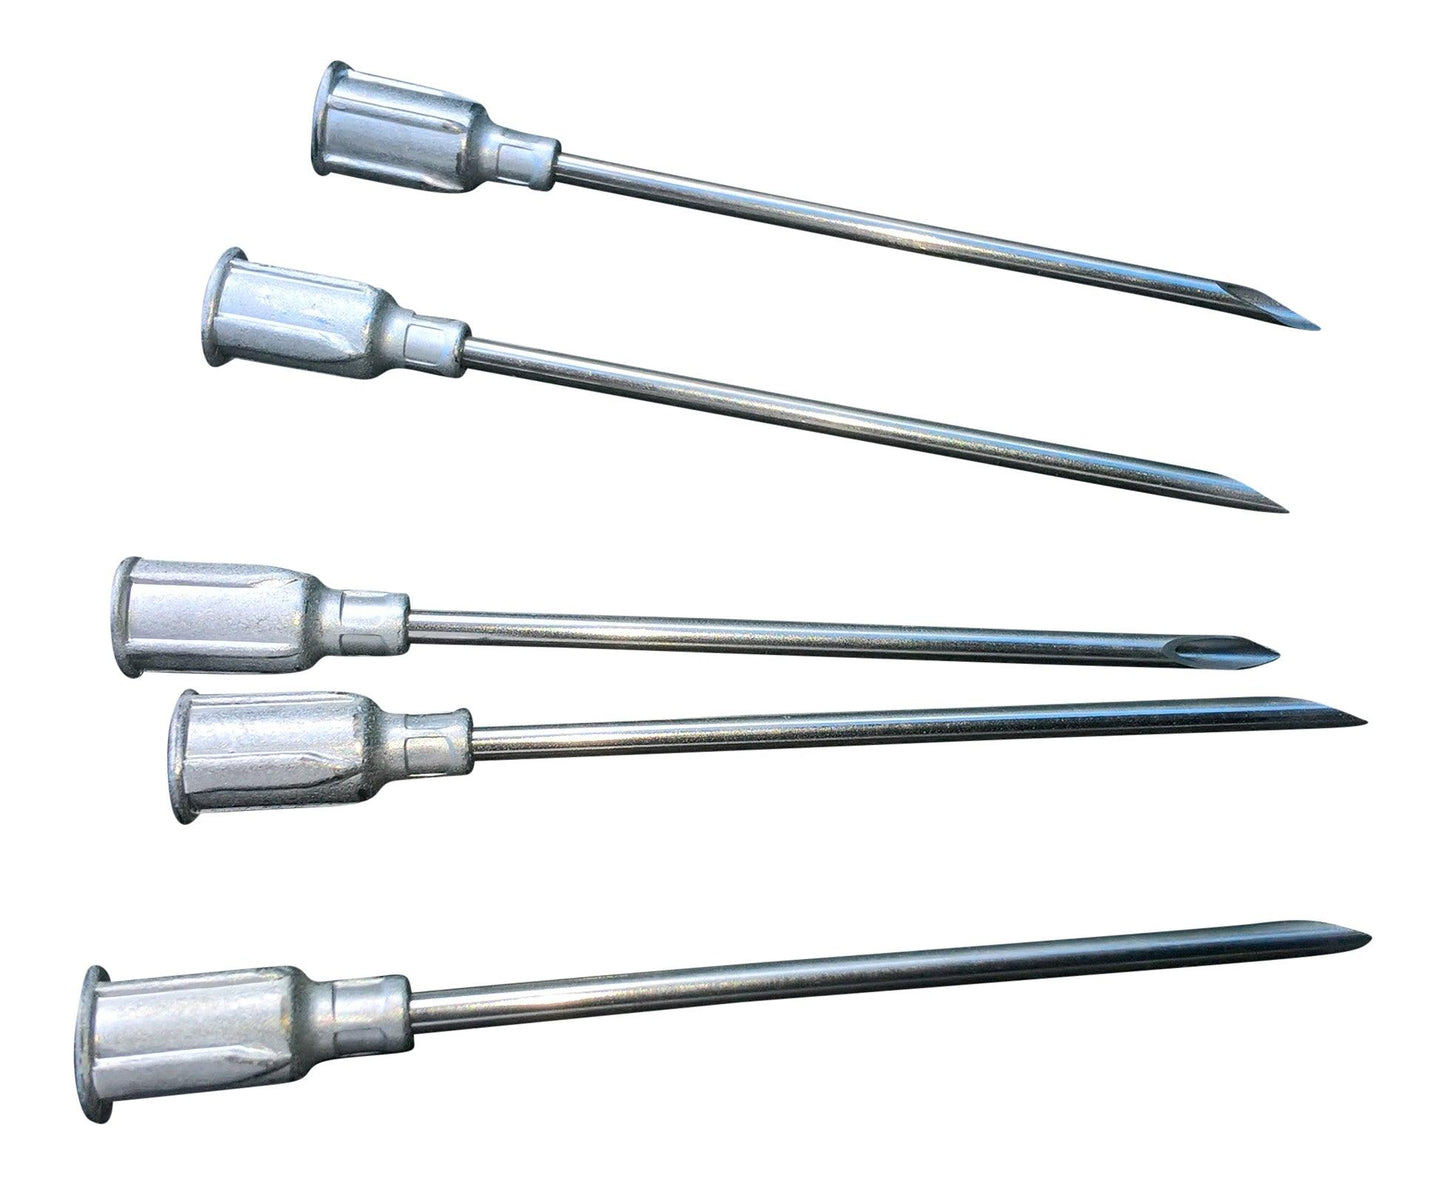 5 x 2-inch 14G Tip-Outlet Meat Injection Needles - BBQ Land